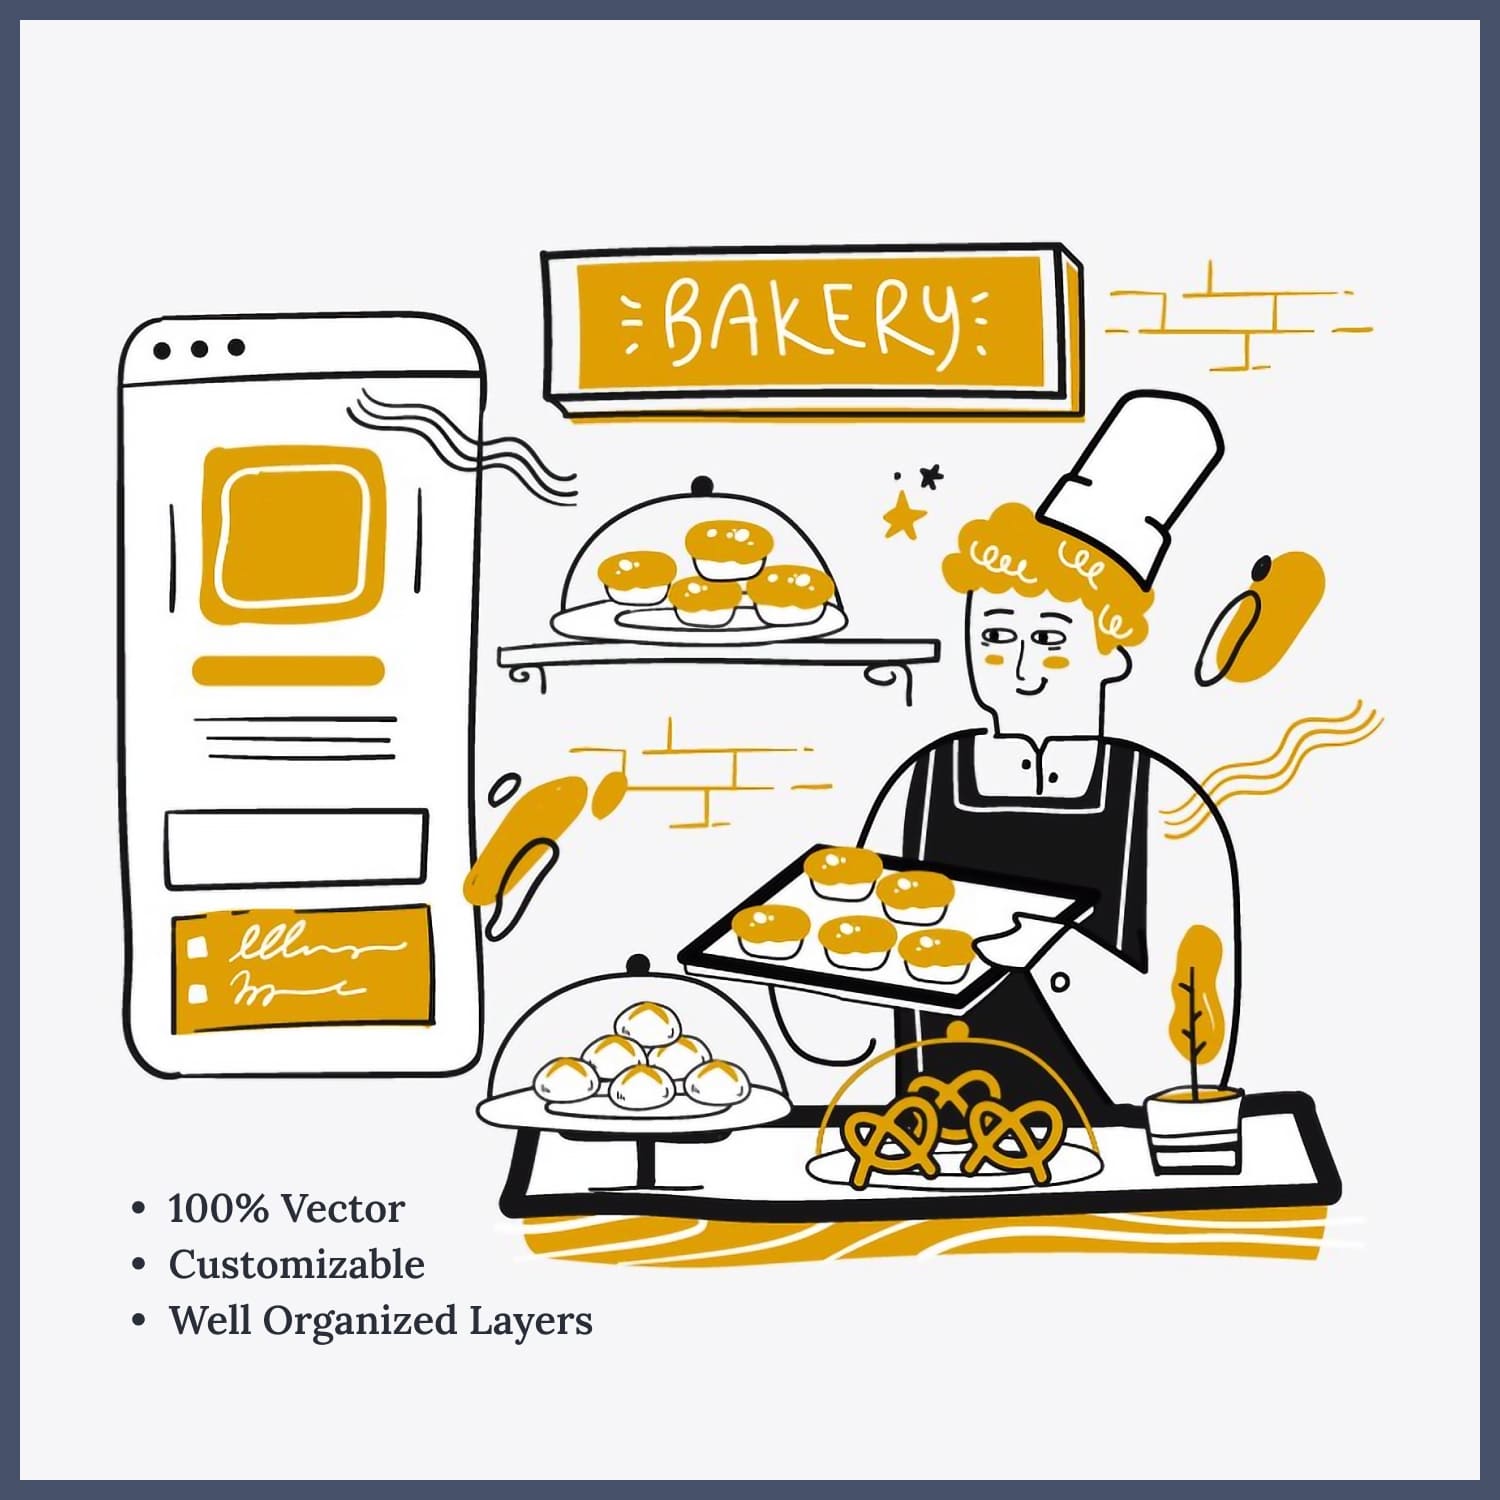 Local Bakery Illustration created by graphicook.